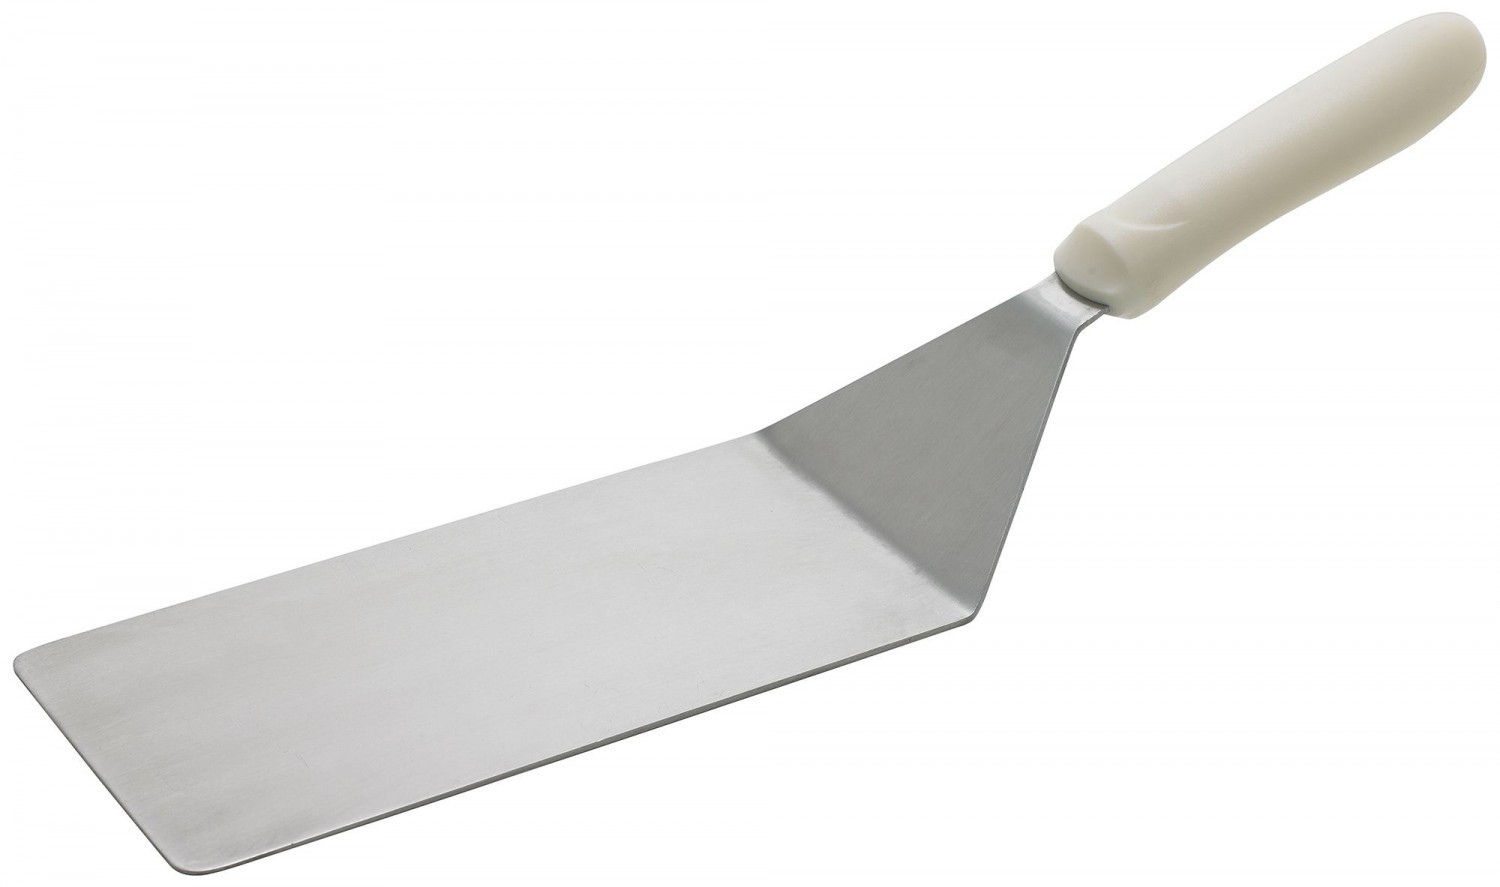 Winco TWP-42 Stainless Steel Turner 8" x 4" Blade